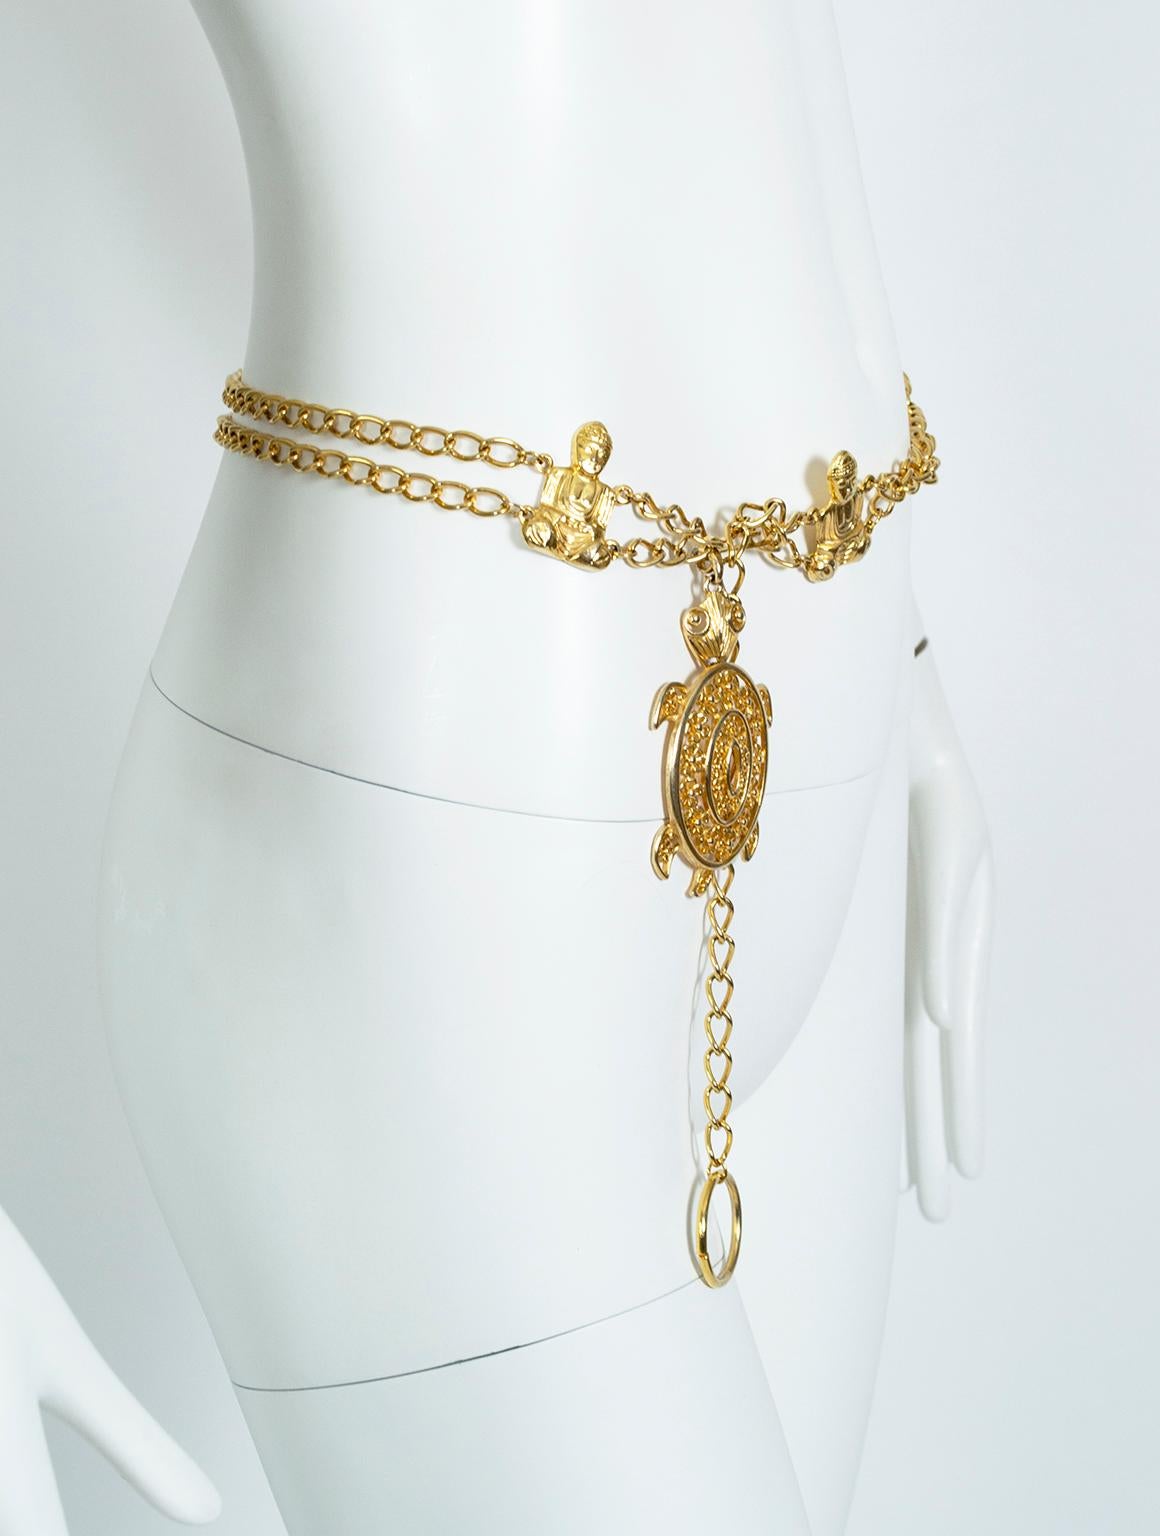 A striking and unusual beauty, this chain belt features figural Buddhas and a large dangling filigree turtle, both of which commemorate the life and spirituality of Buddhist monks. Believed to possess divine powers, turtles represented wisdom and